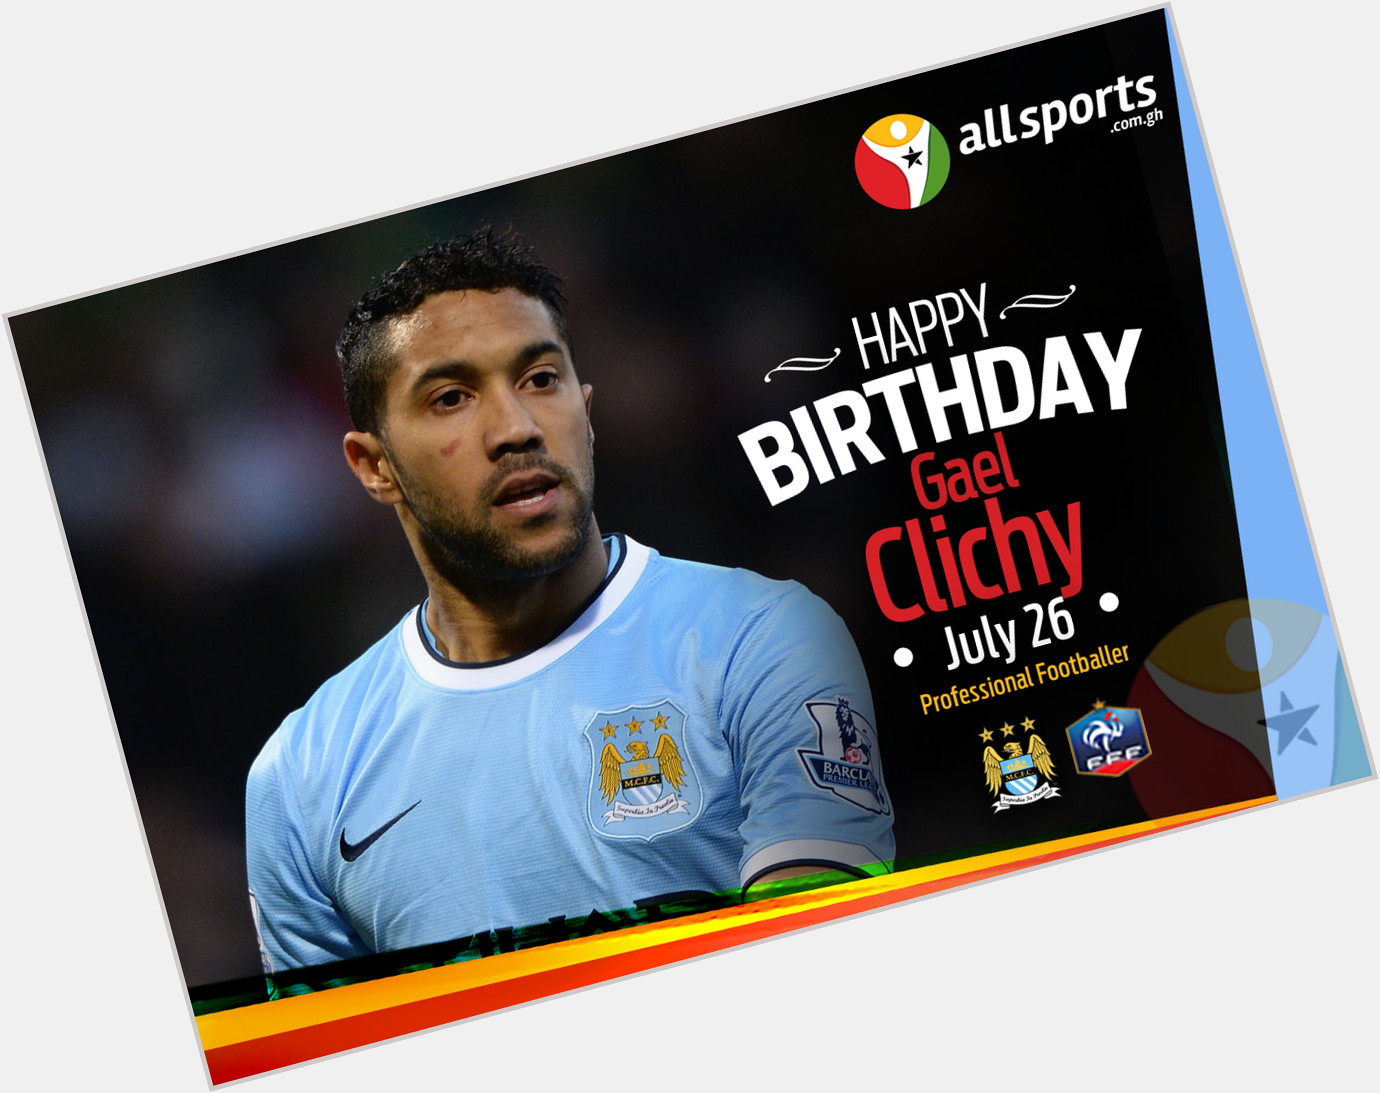 AllSportsGh wishes and French defender Gael Clichy a HAPPY BIRTHDAY as he turns 30 today 